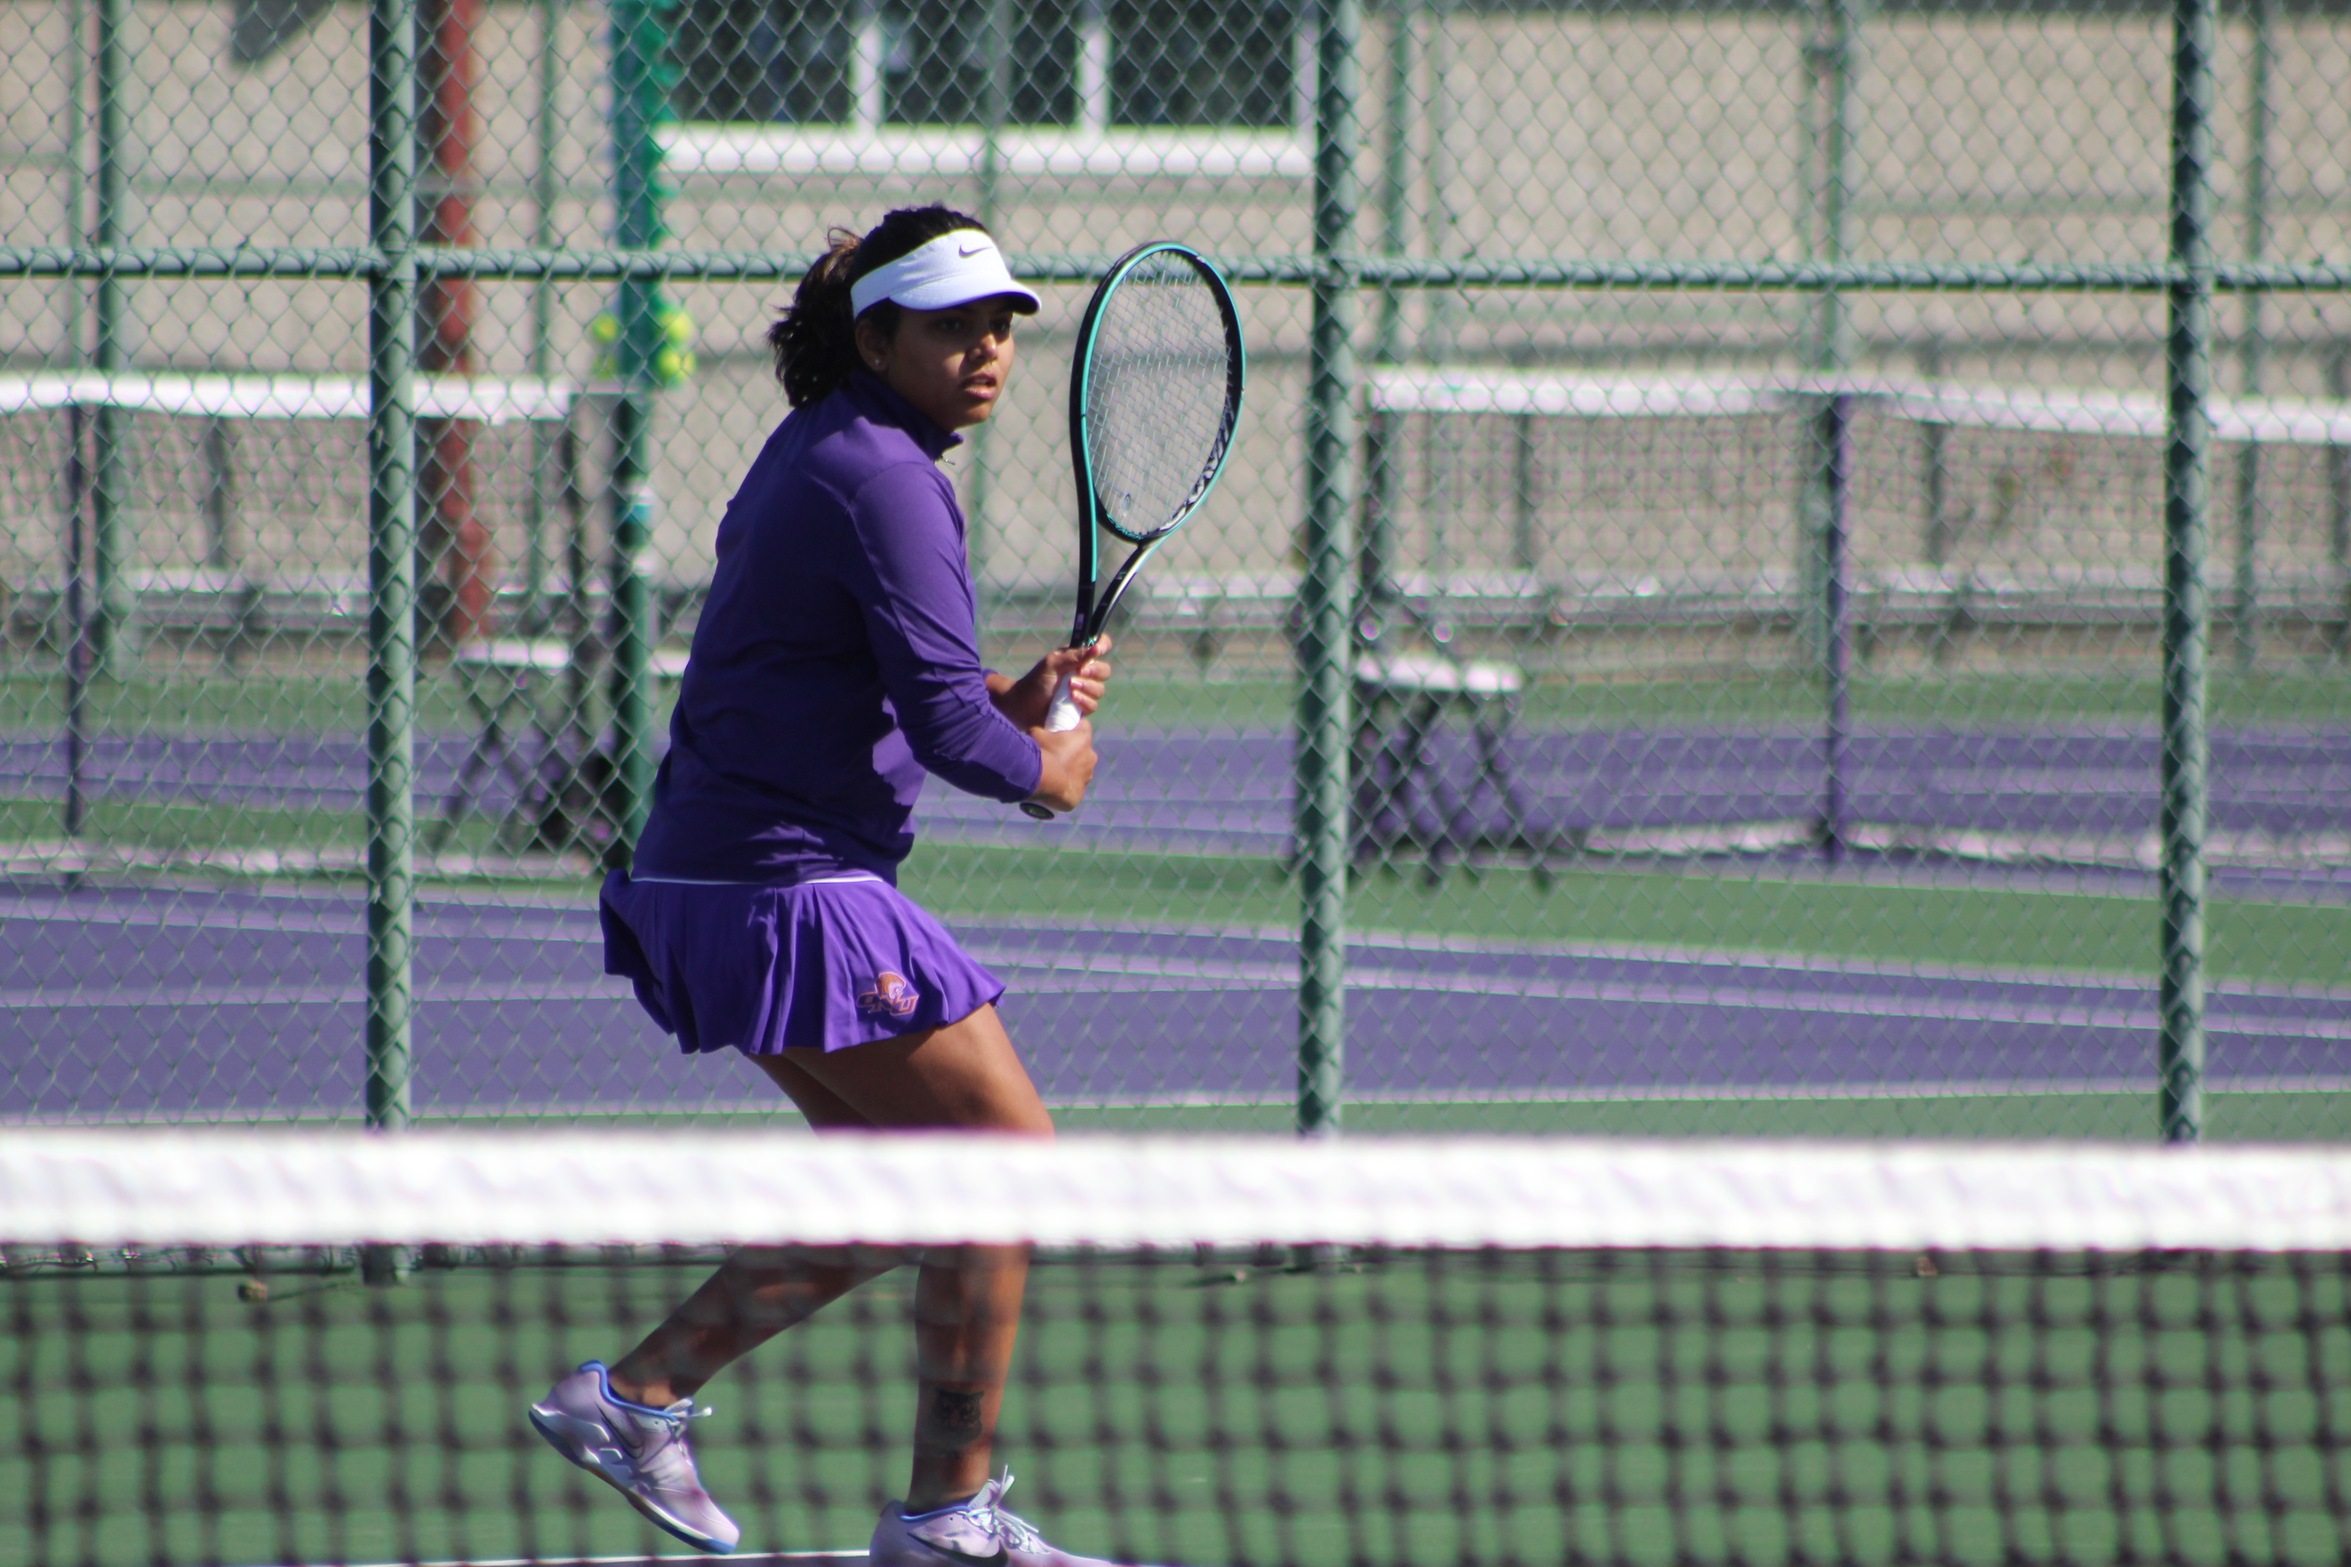 PATEL AND NIETO DOMINATE DOUBLES AS TIGERS DROP TWO MATCHES